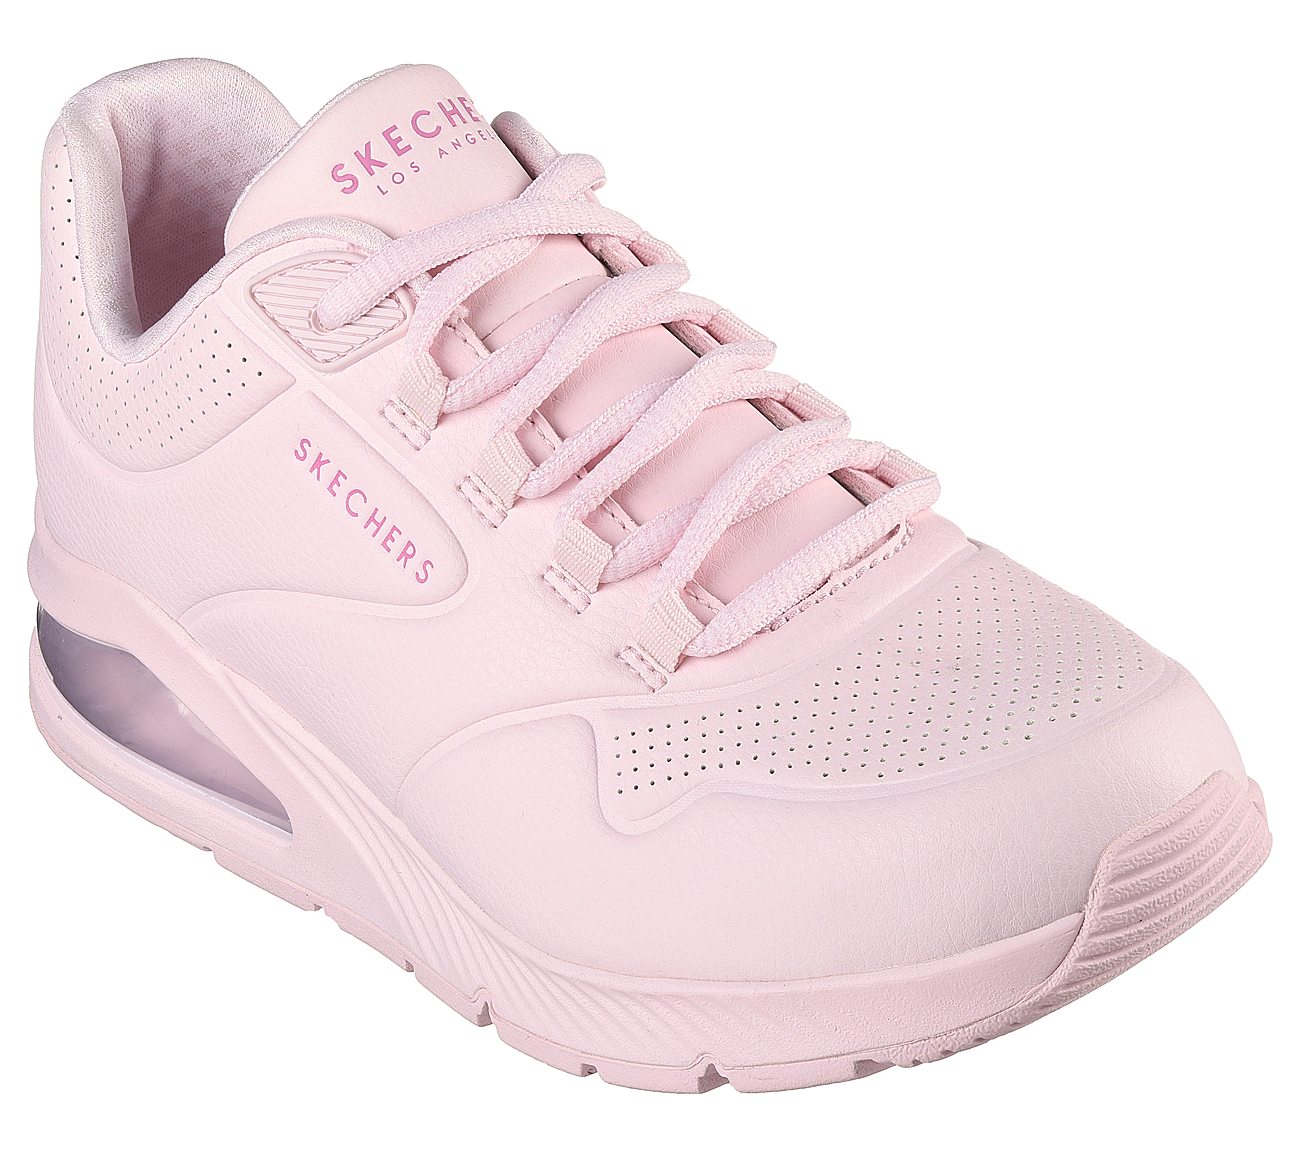 UNO 2 - PASTEL PLAYERS, LLLIGHT PINK Footwear Lateral View